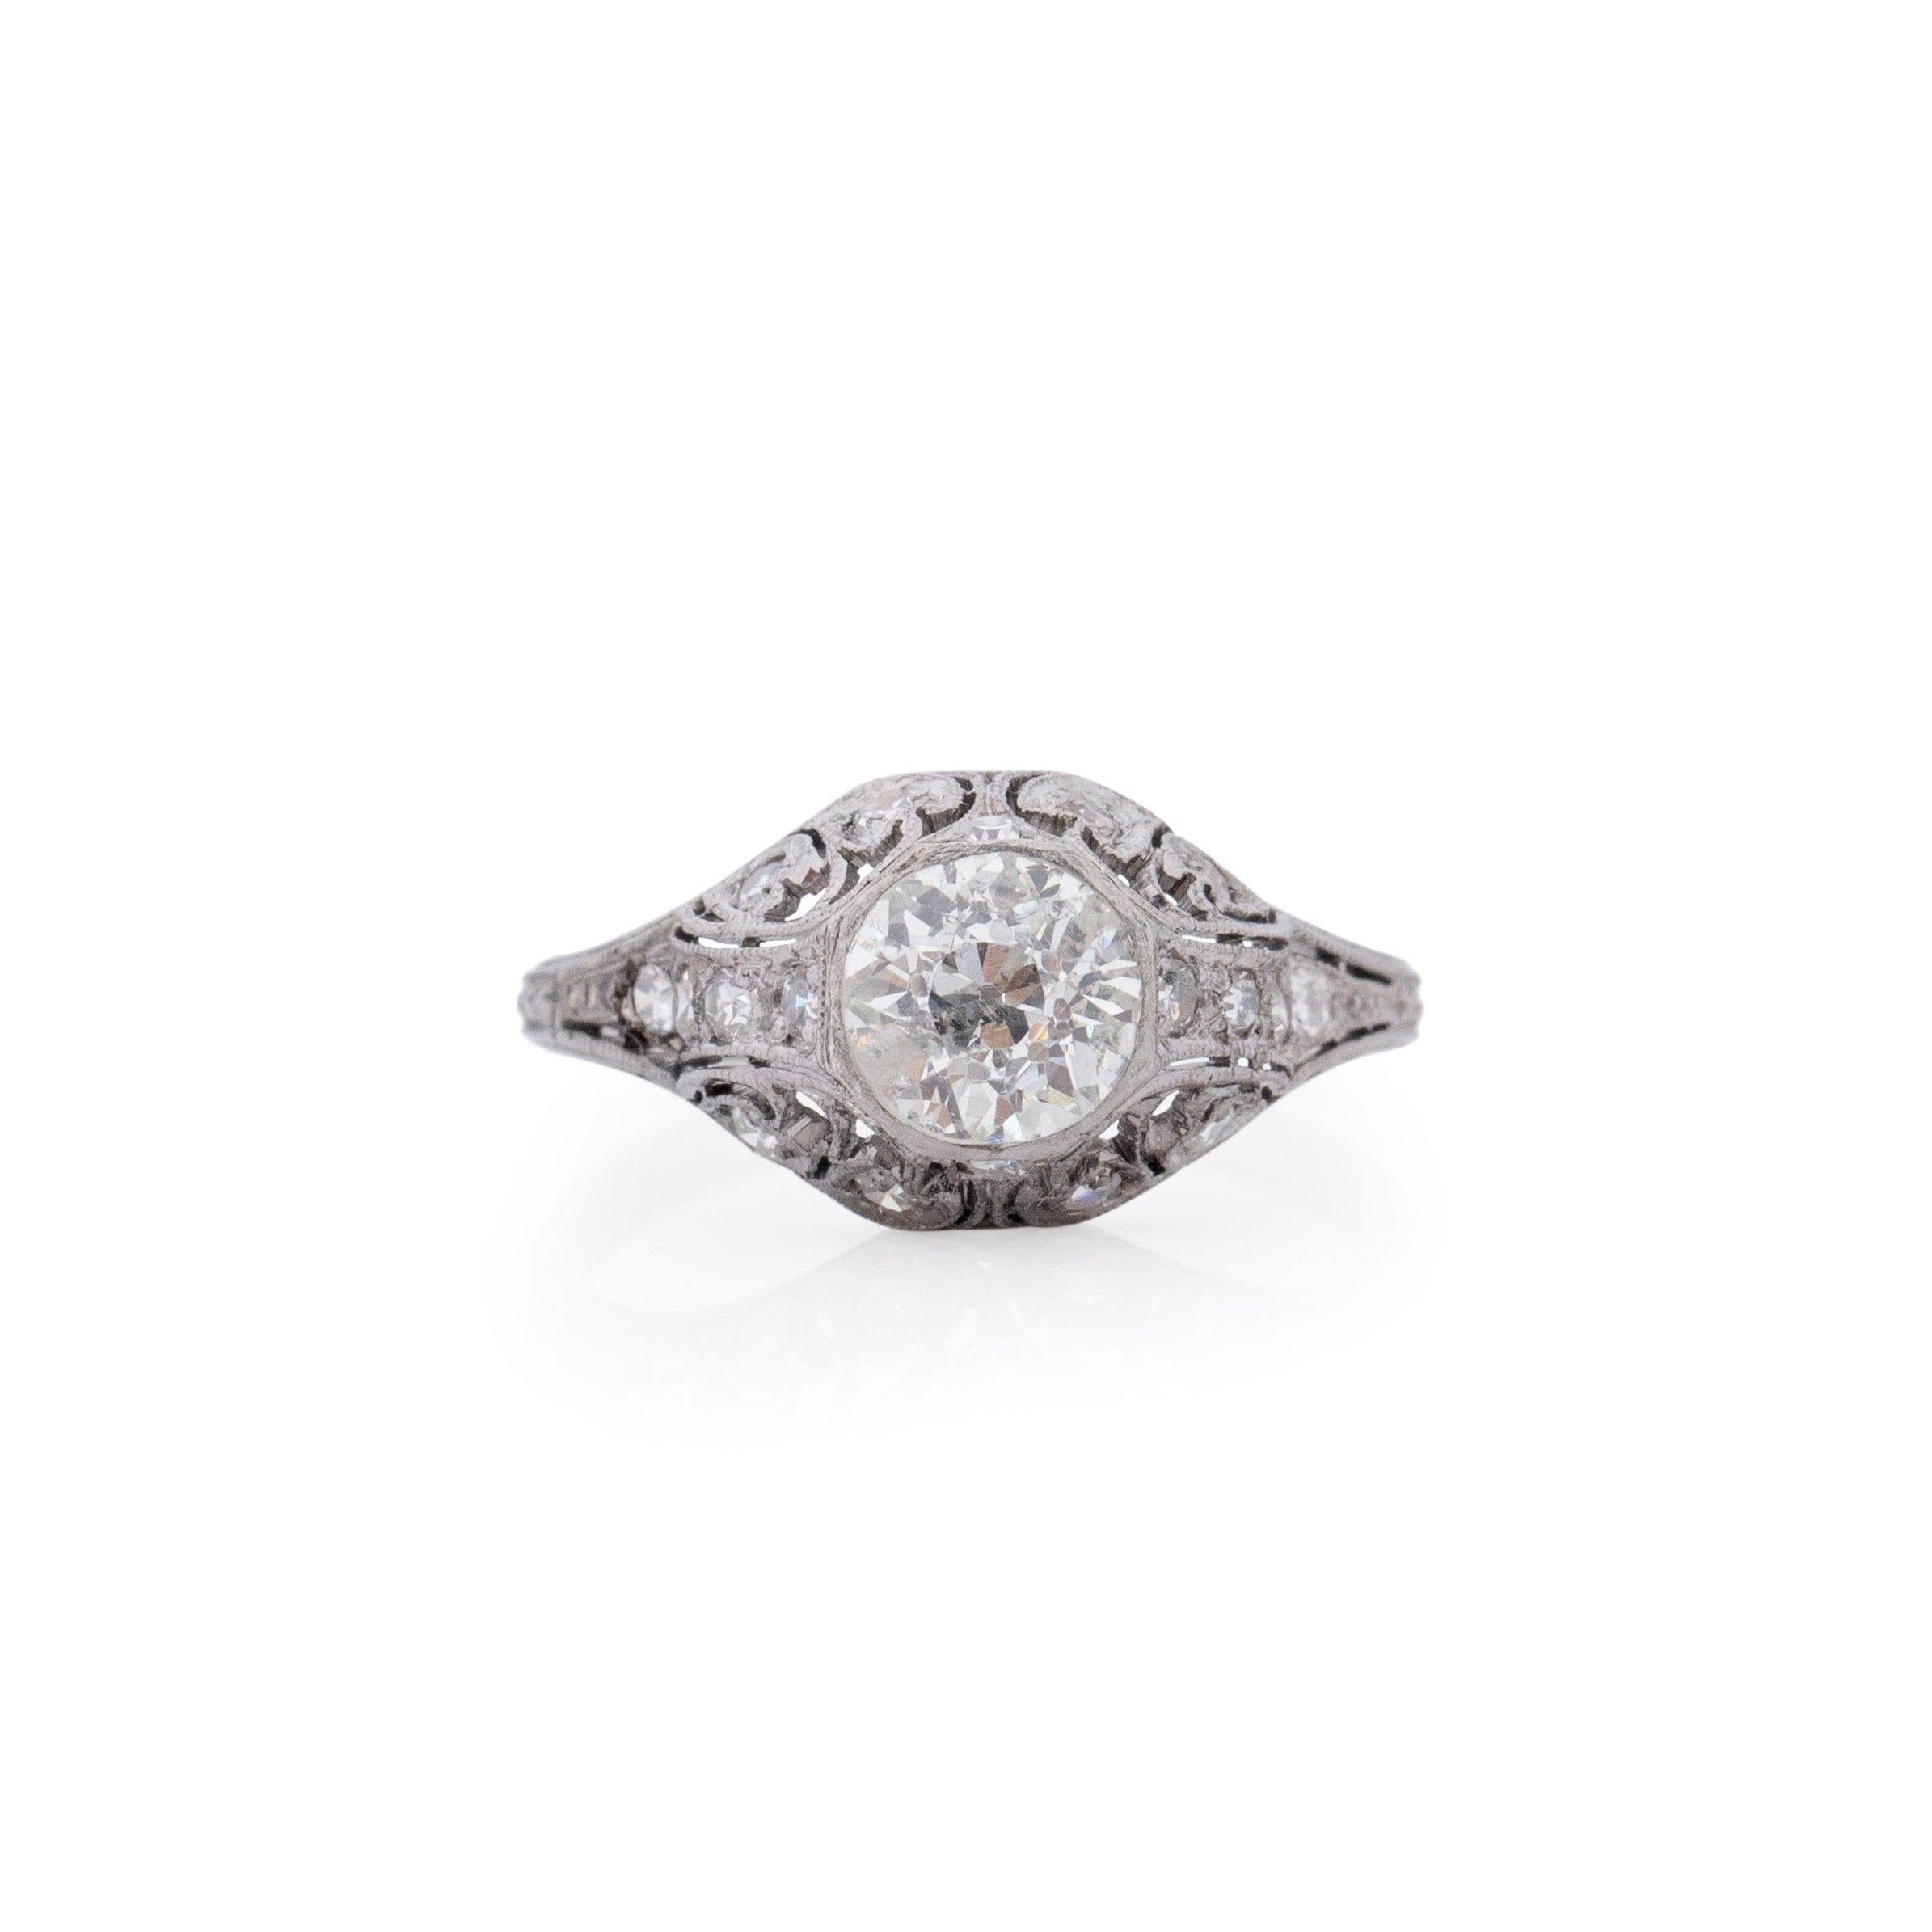 A testament to the elegance of the Edwardian era, this antique masterpiece is set in platinum and features a resplendent old European cut diamond as its centerpiece. Encircled by 16 dazzling accent diamonds, it exudes a classic Edwardian charm. The